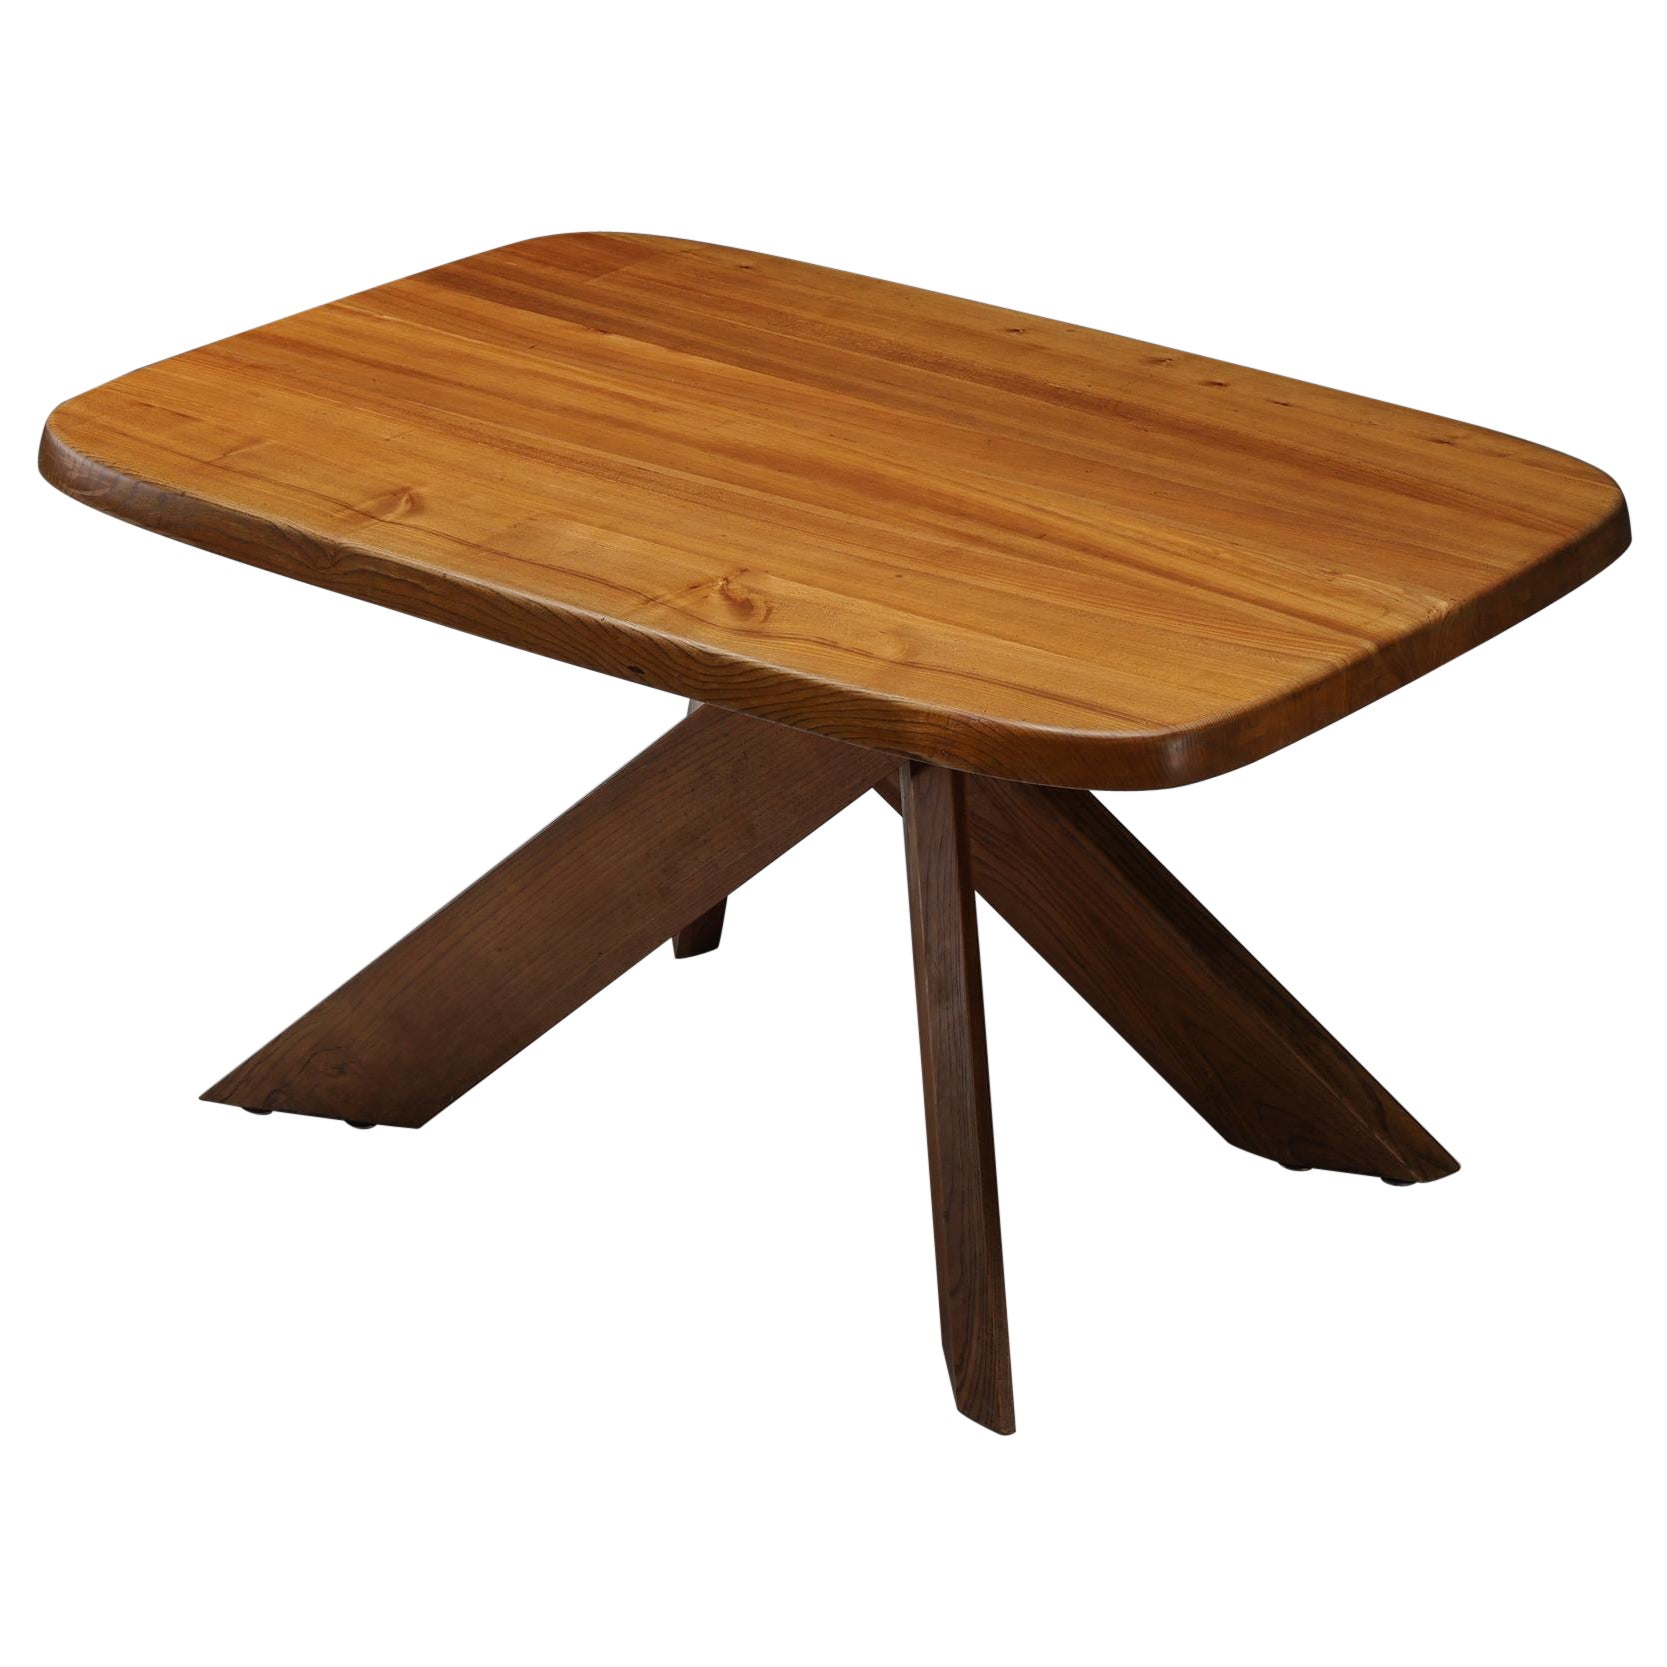 Pierre Chapo Solid Elm Dining Table Model 'T35b', Craftsmanship, France, 1960's For Sale